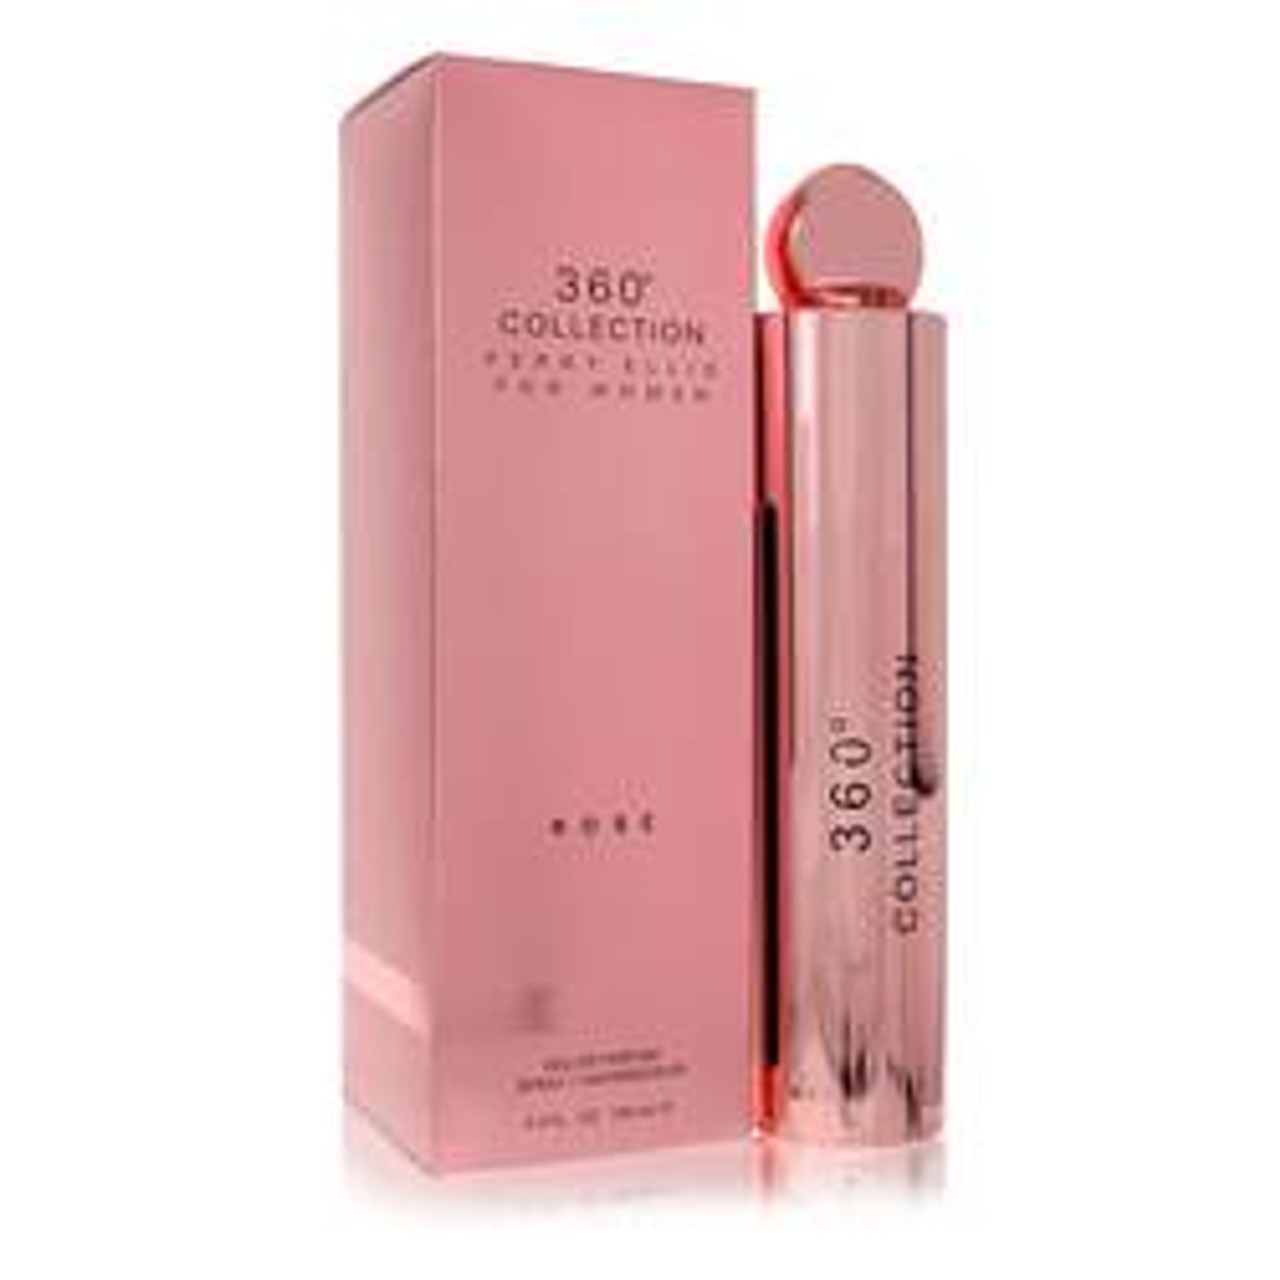 Perry Ellis 360 Collection Rose Perfume By Perry Ellis Eau De Parfum Spray 3.4 oz for Women - [From 96.00 - Choose pk Qty ] - *Ships from Miami